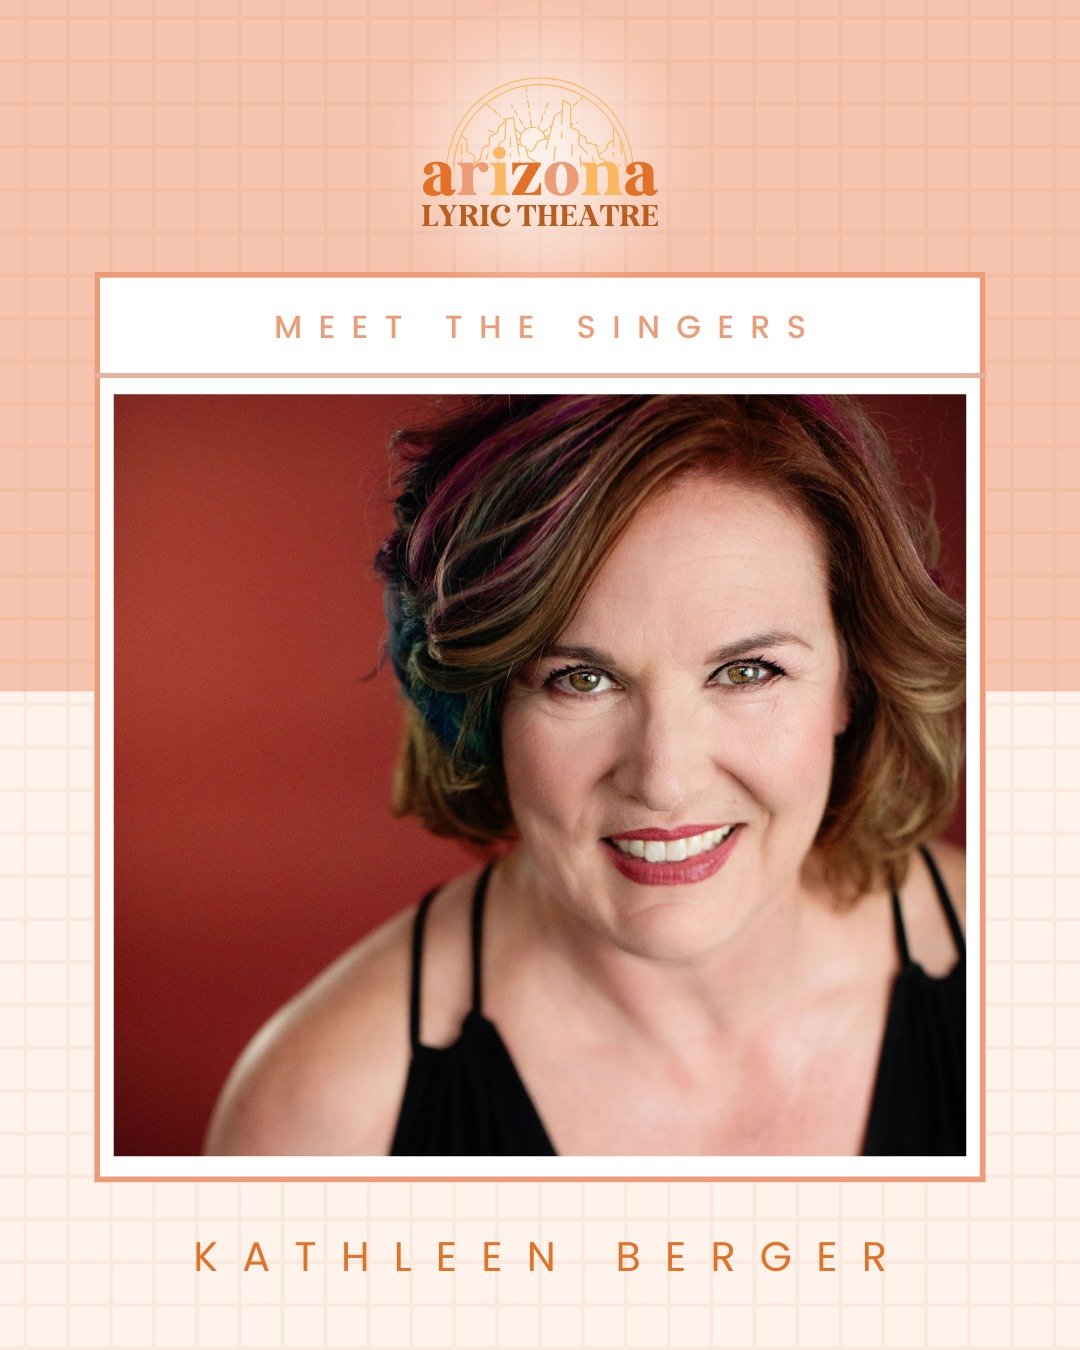 MEET THE SINGERS: We are thrilled to have Kathleen Berger singing at our upcoming benefit concert! Come hear her masterfully sing Zarzuela and a little Les mis surprise! It is sure to be an experience you won&rsquo;t want to miss. 🤩

Kathleen Berger